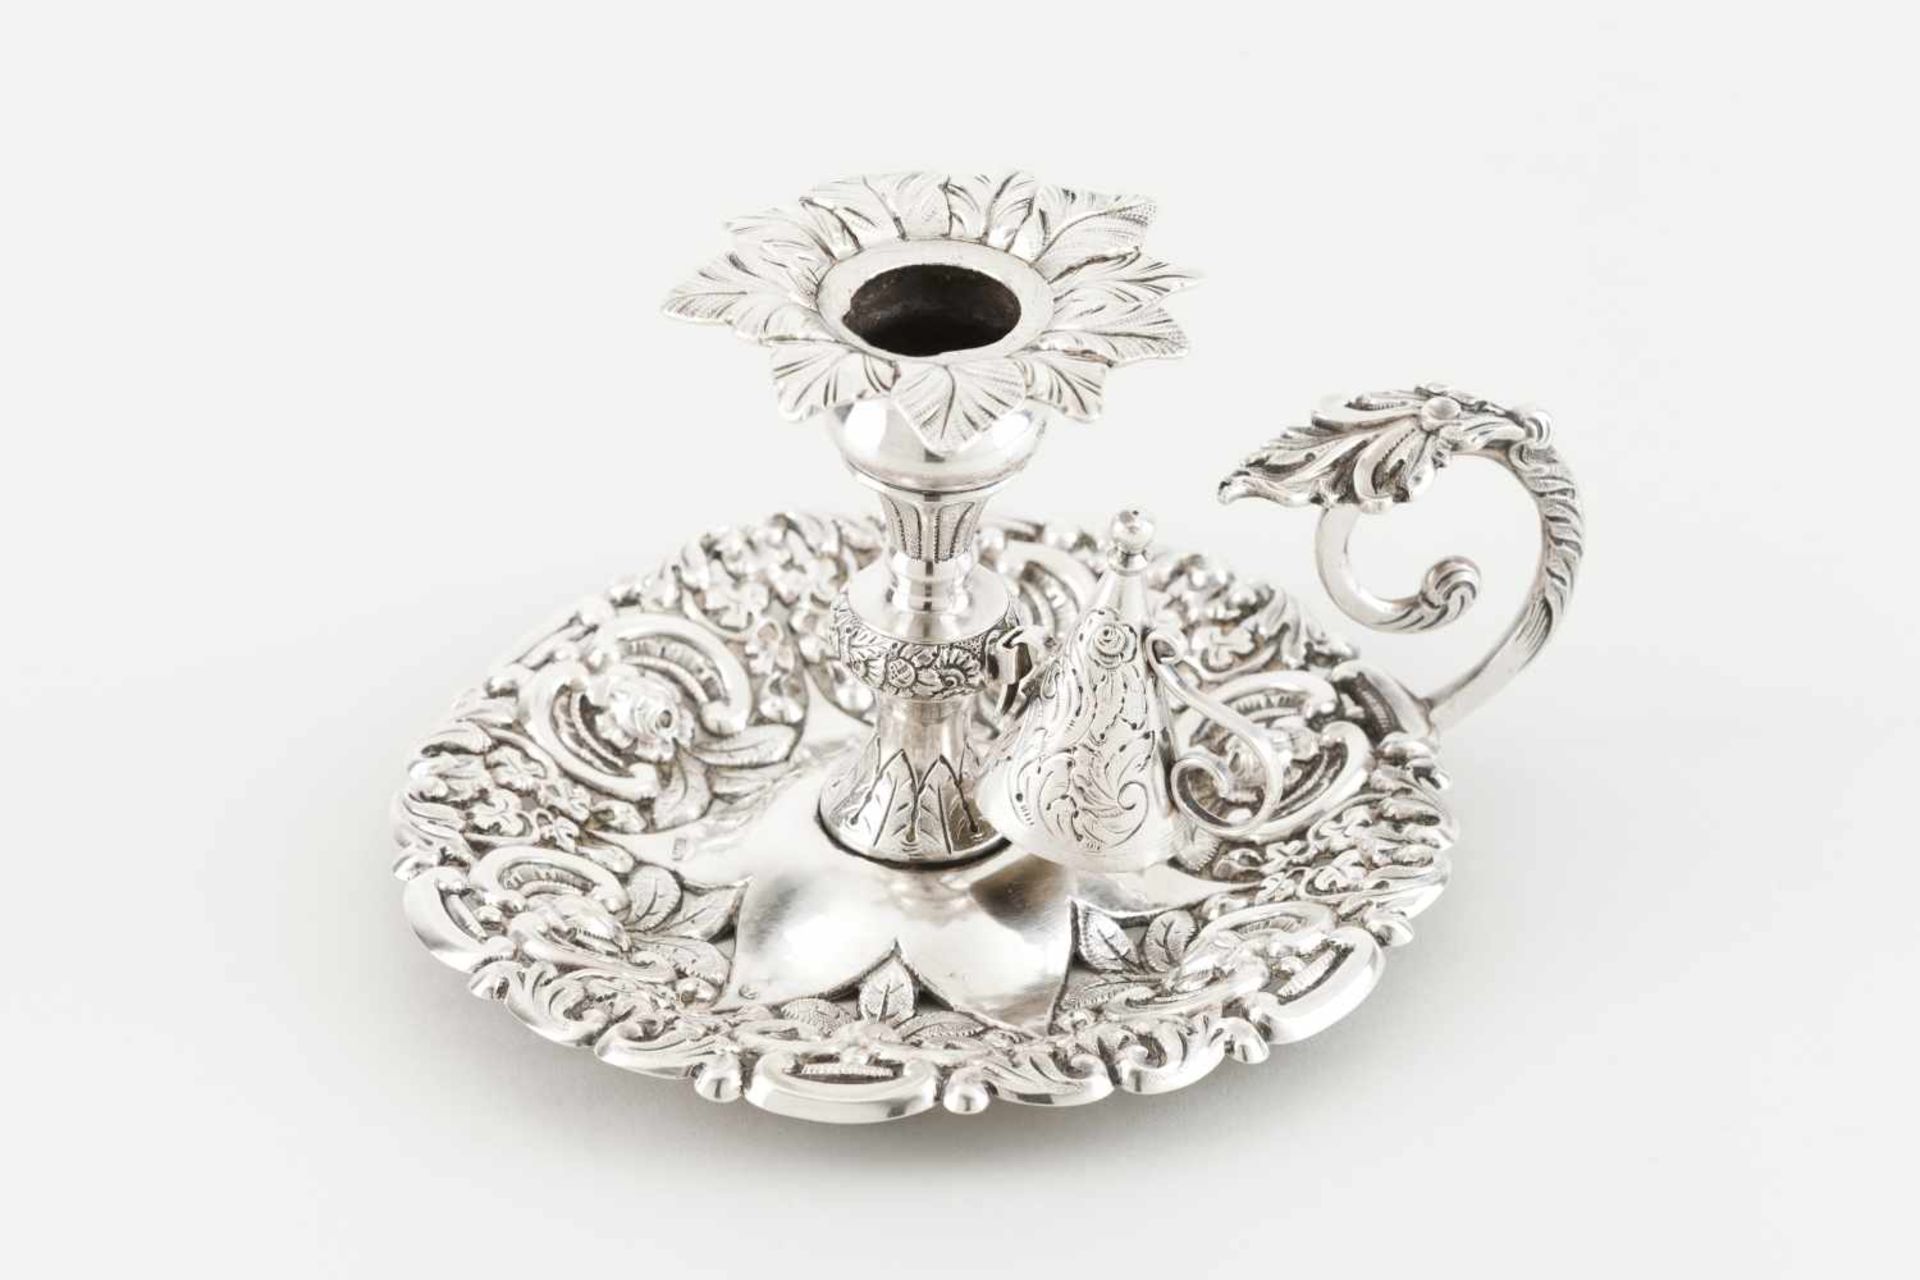 A Chamber stick with snufferPortuguese silverRaised floral and foliage decoration with snuf